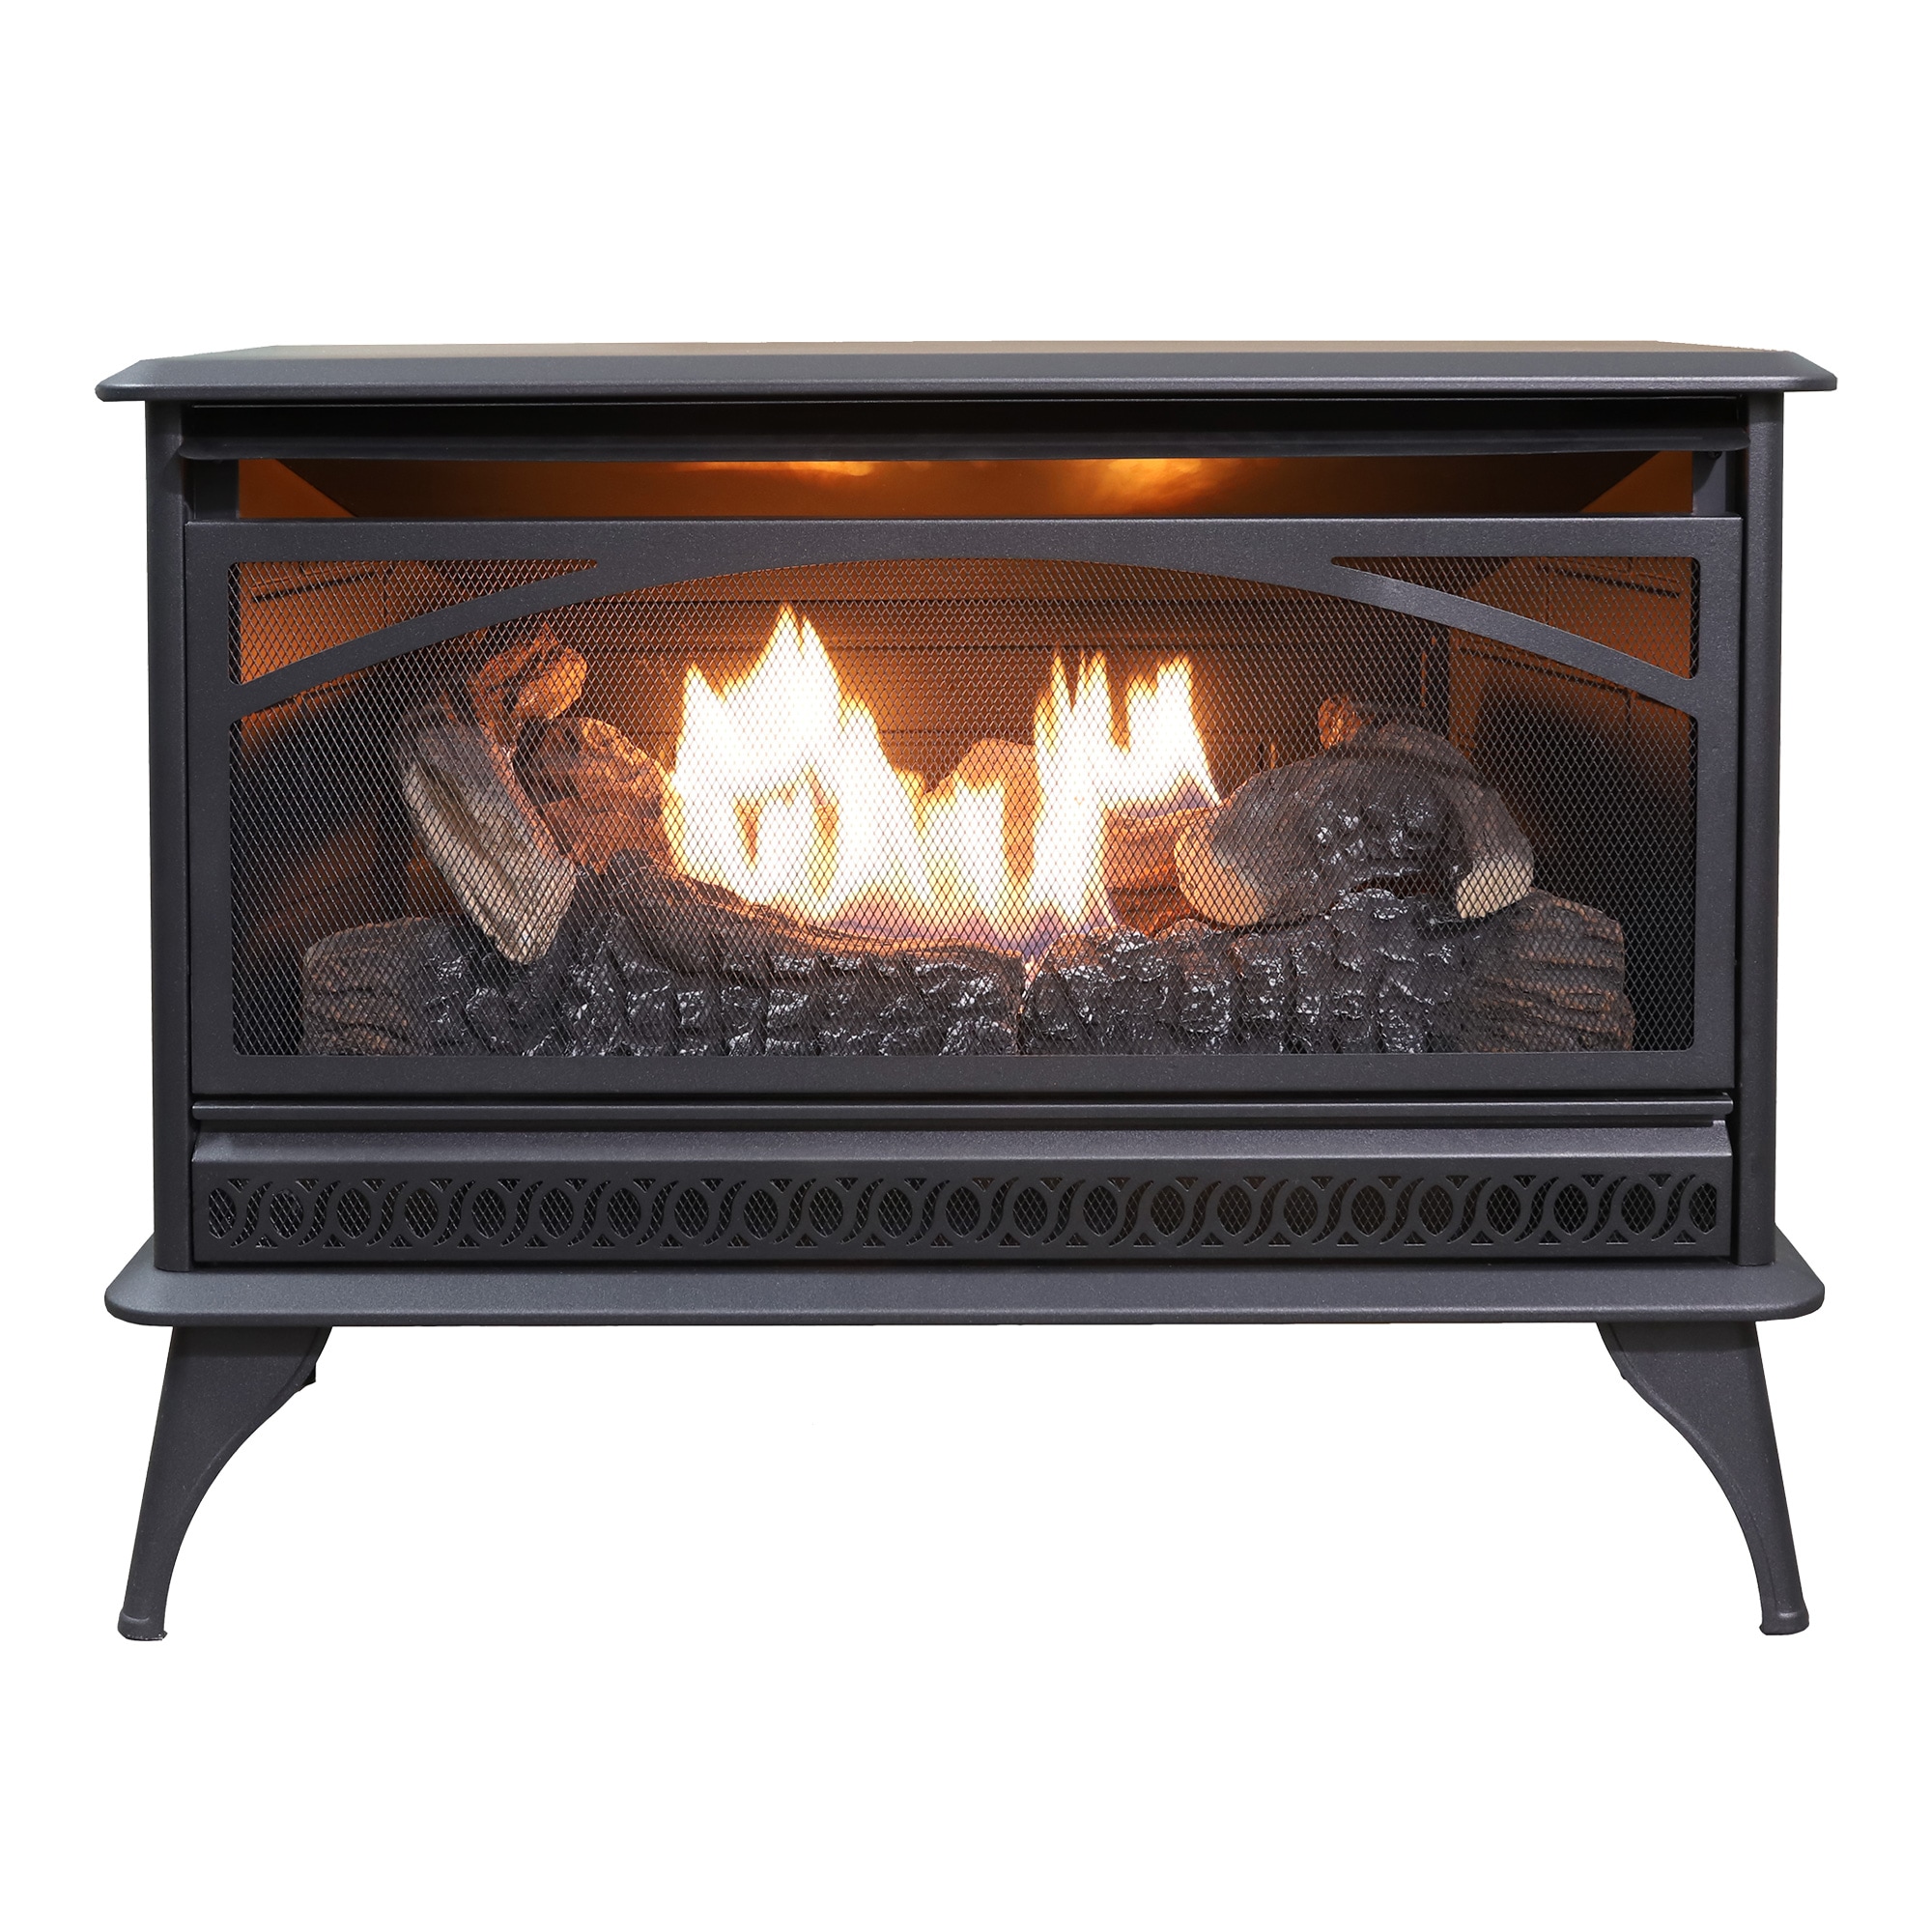 Propane Fireplaces & Gas Stoves, ID, MT & WY